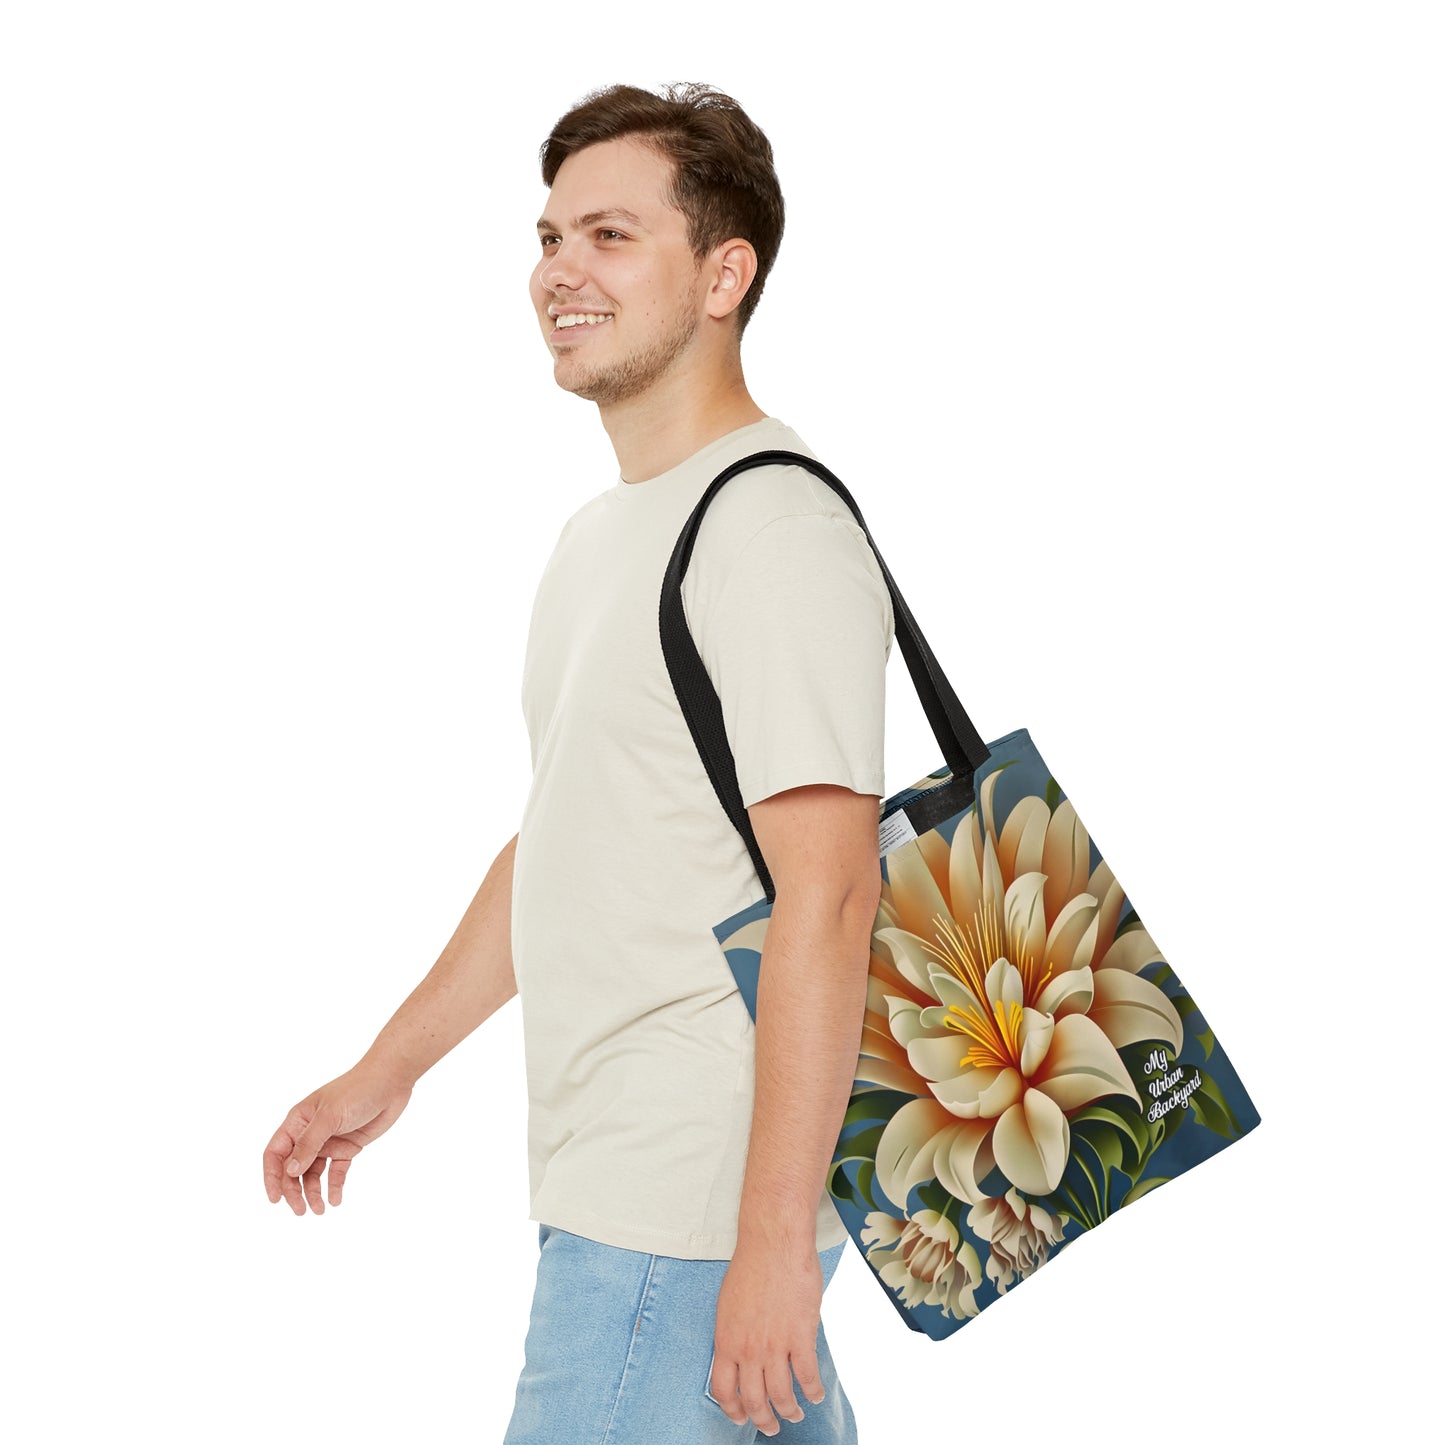 Large White Flower, Tote Bag for Everyday Use - Durable and Functional